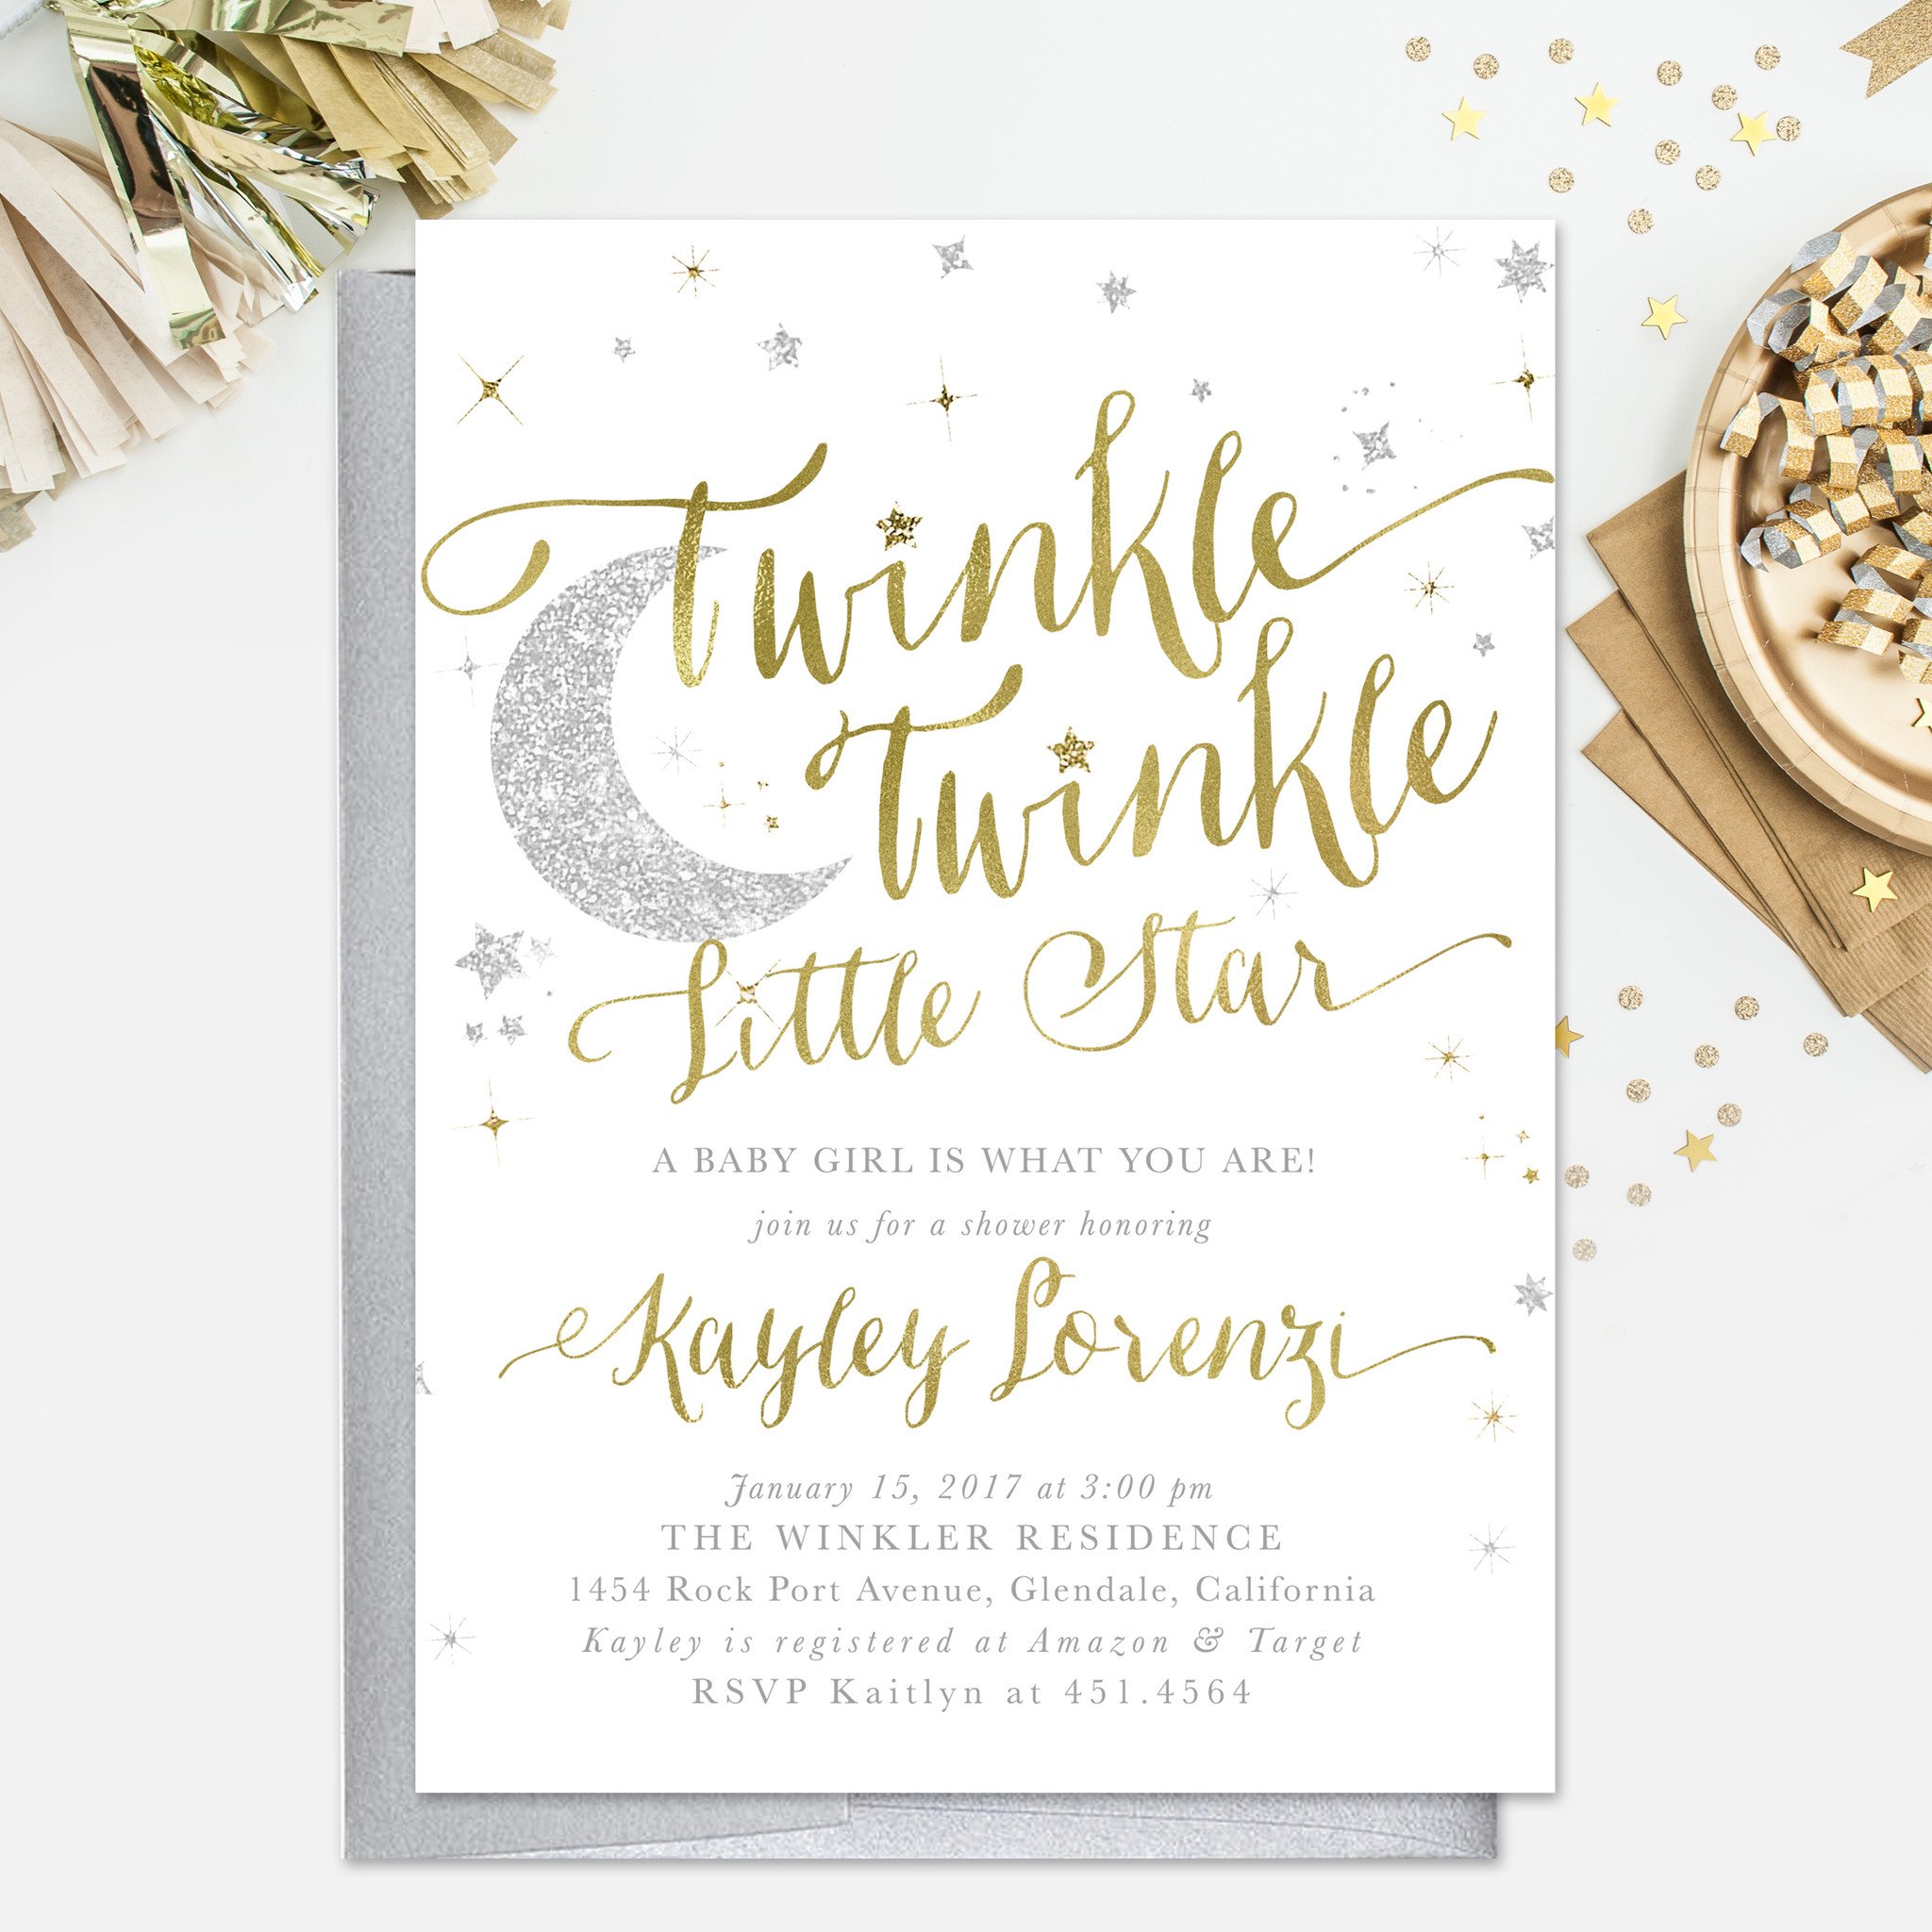 Full Size of Baby Shower:cheap Invitations Baby Shower Pinterest Baby Shower Ideas For Girls Baby Girl Themed Showers Pinterest Nursery Ideas Baby Shower Menu Homemade Baby Shower Decorations All Star Baby Shower Girl Baby Shower Plates